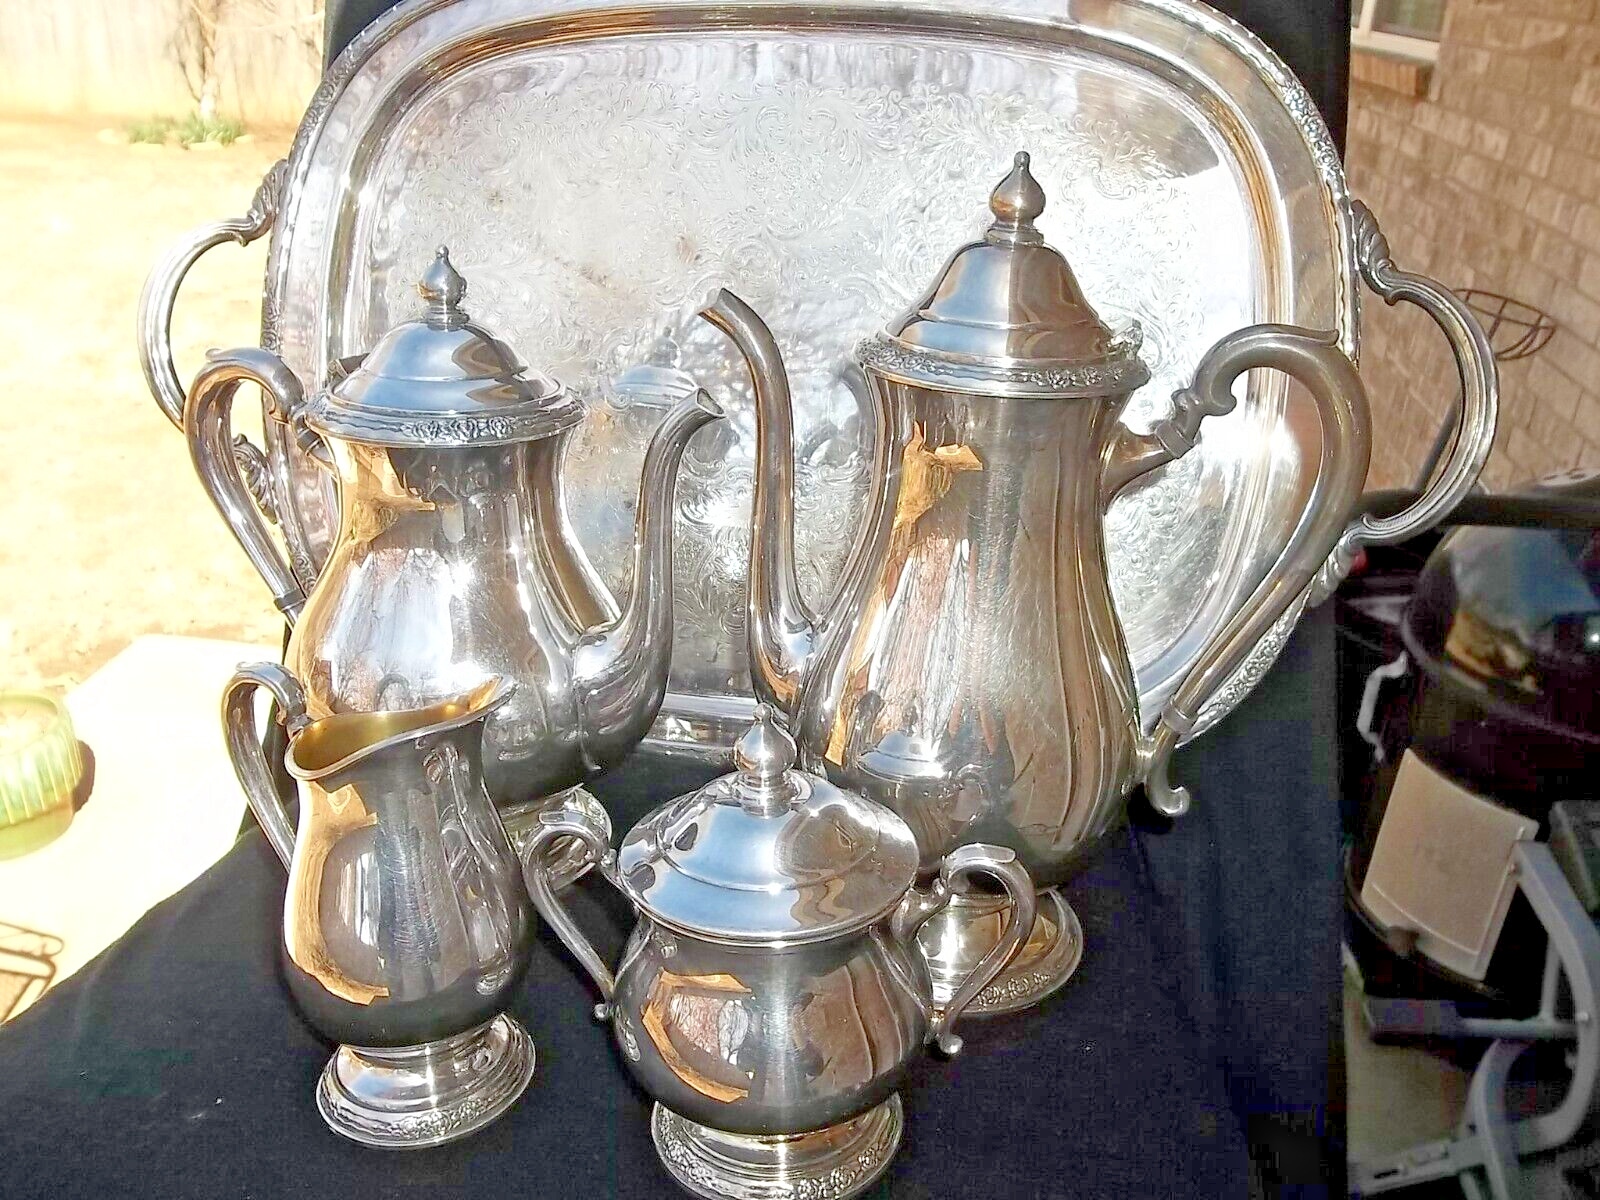 5 PC TEA / COFFEE  SERVER CAMILLE  HOLLOWARE W/ TRAY  BY INTERNATIONAL SILVER CO